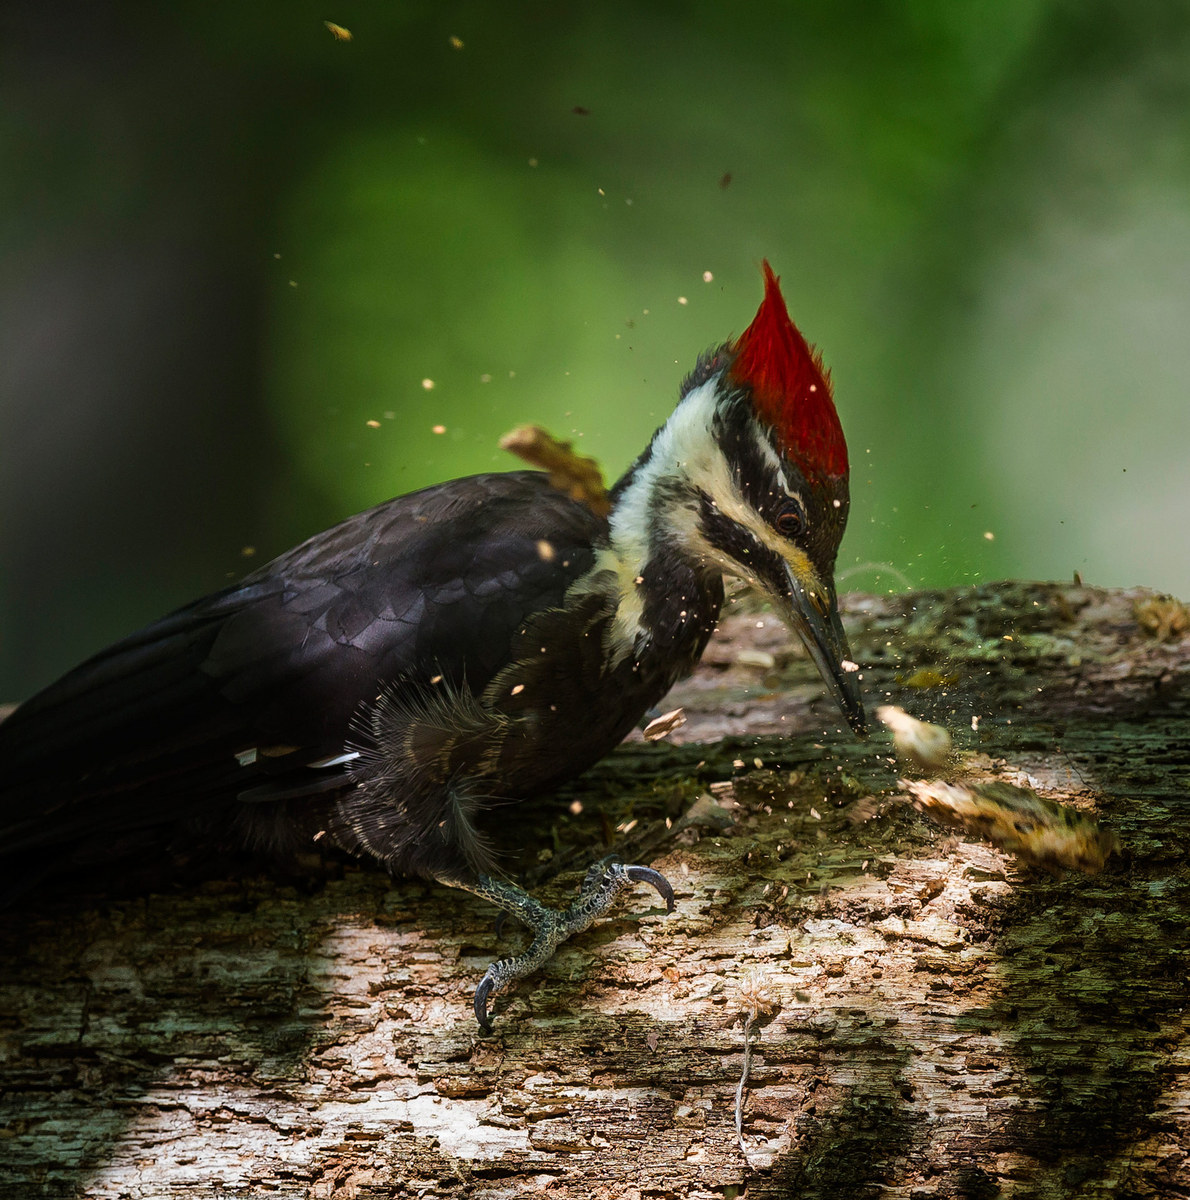 A female Pileated Woodpecker blasts away material from the fallen tree in her search for a juicy grub.

District of Columbia 
Rock Creek Park "Maintenance Yard"

May 2015